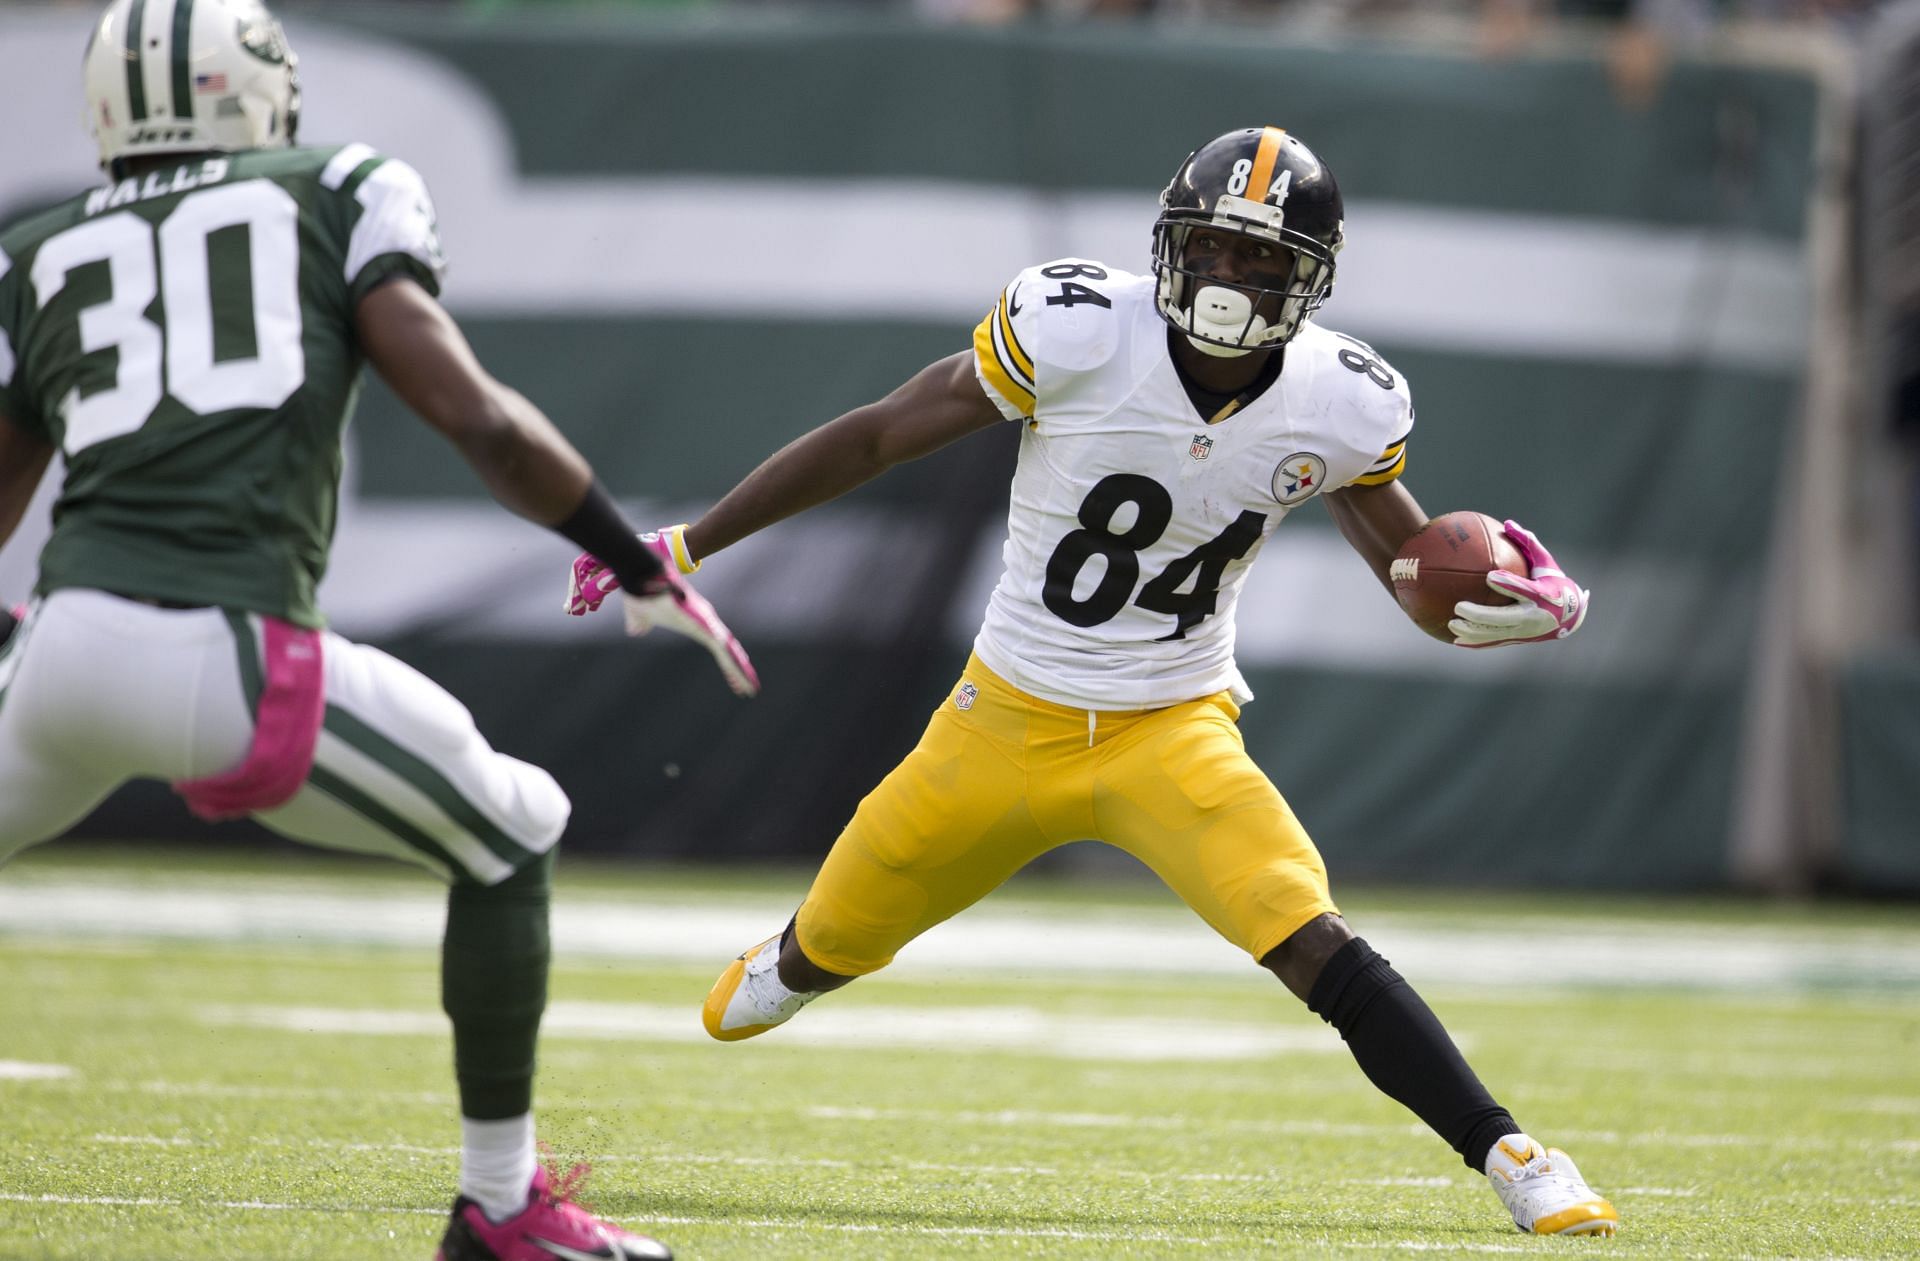 Antonio Brown in action for the Pittsburgh Steelers.